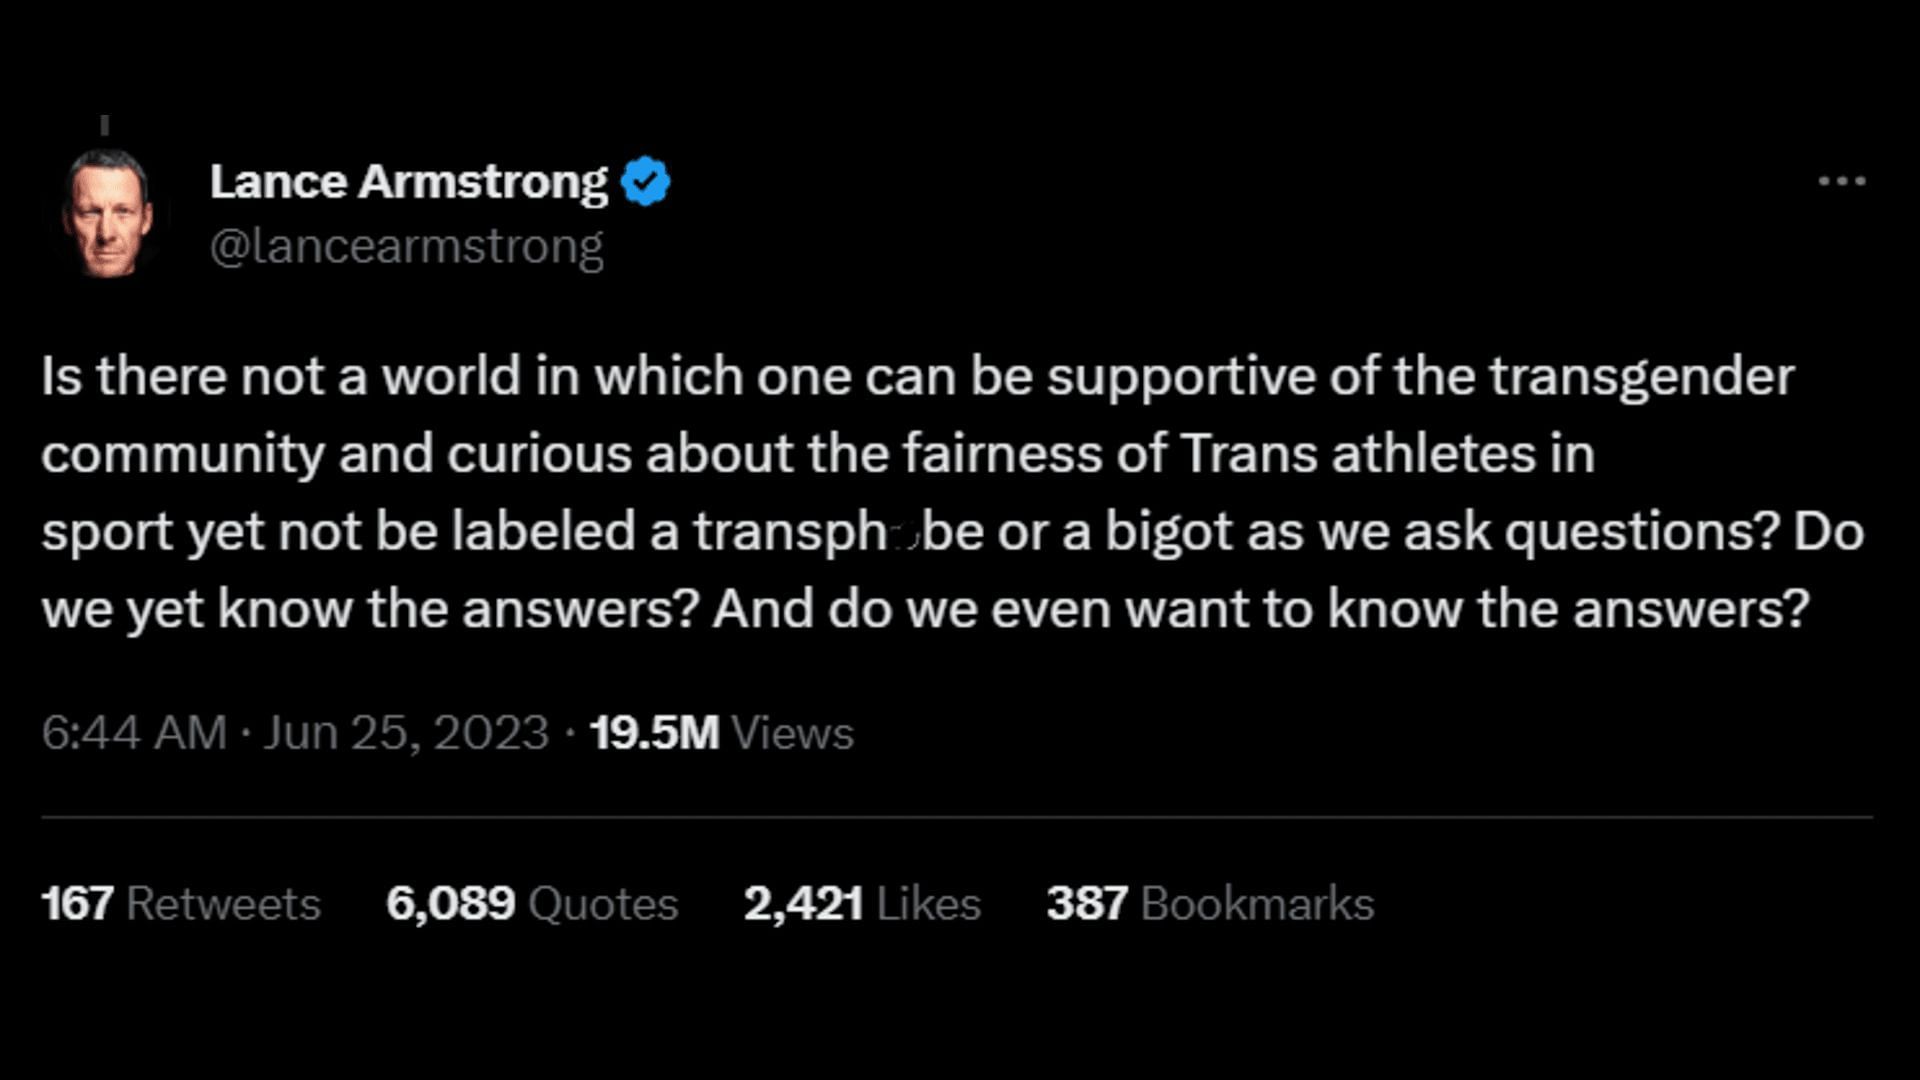 Lance Armstrong&#039;s tweet about trans representation in sports. (Image via Twitter/Lance Armstrong)